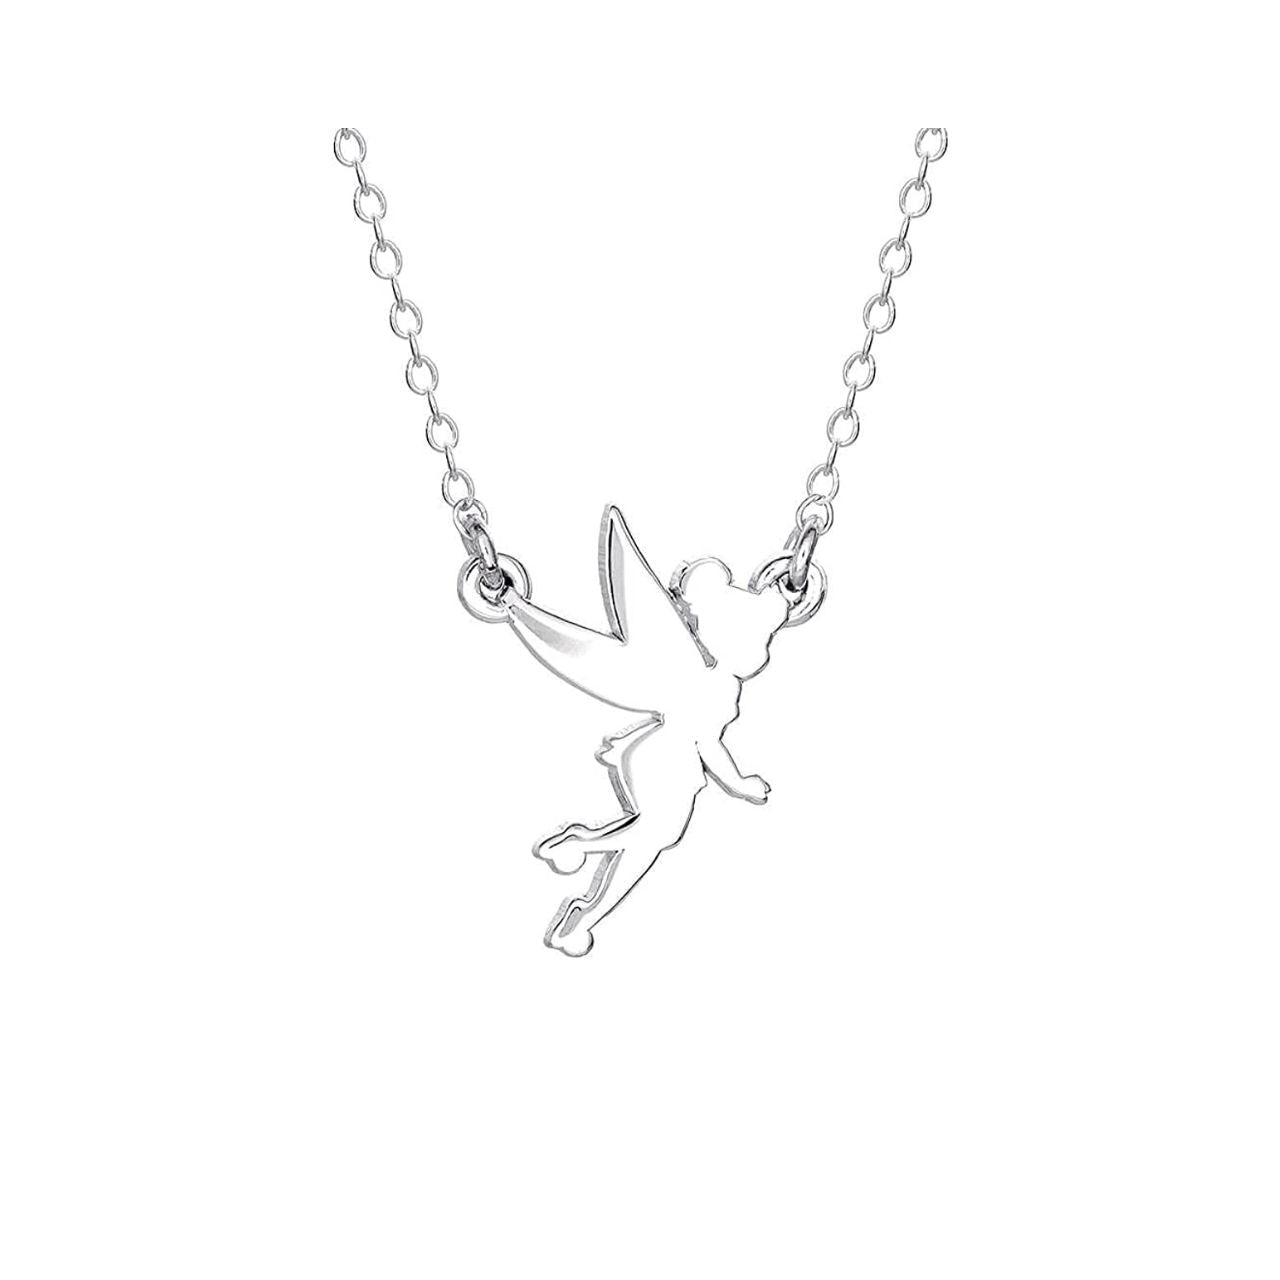 Disney Tinkerbell Silhouette Sterling Silver Necklace Princess Collection  Disney Princess Collection, add that magical look with these amazing and instantly recognizable famous silhouette of Tinkerbell.  Trendy and fashionable design, the Disney Princess collection, sterling silver necklace add a chic, fun touch to any outfit.